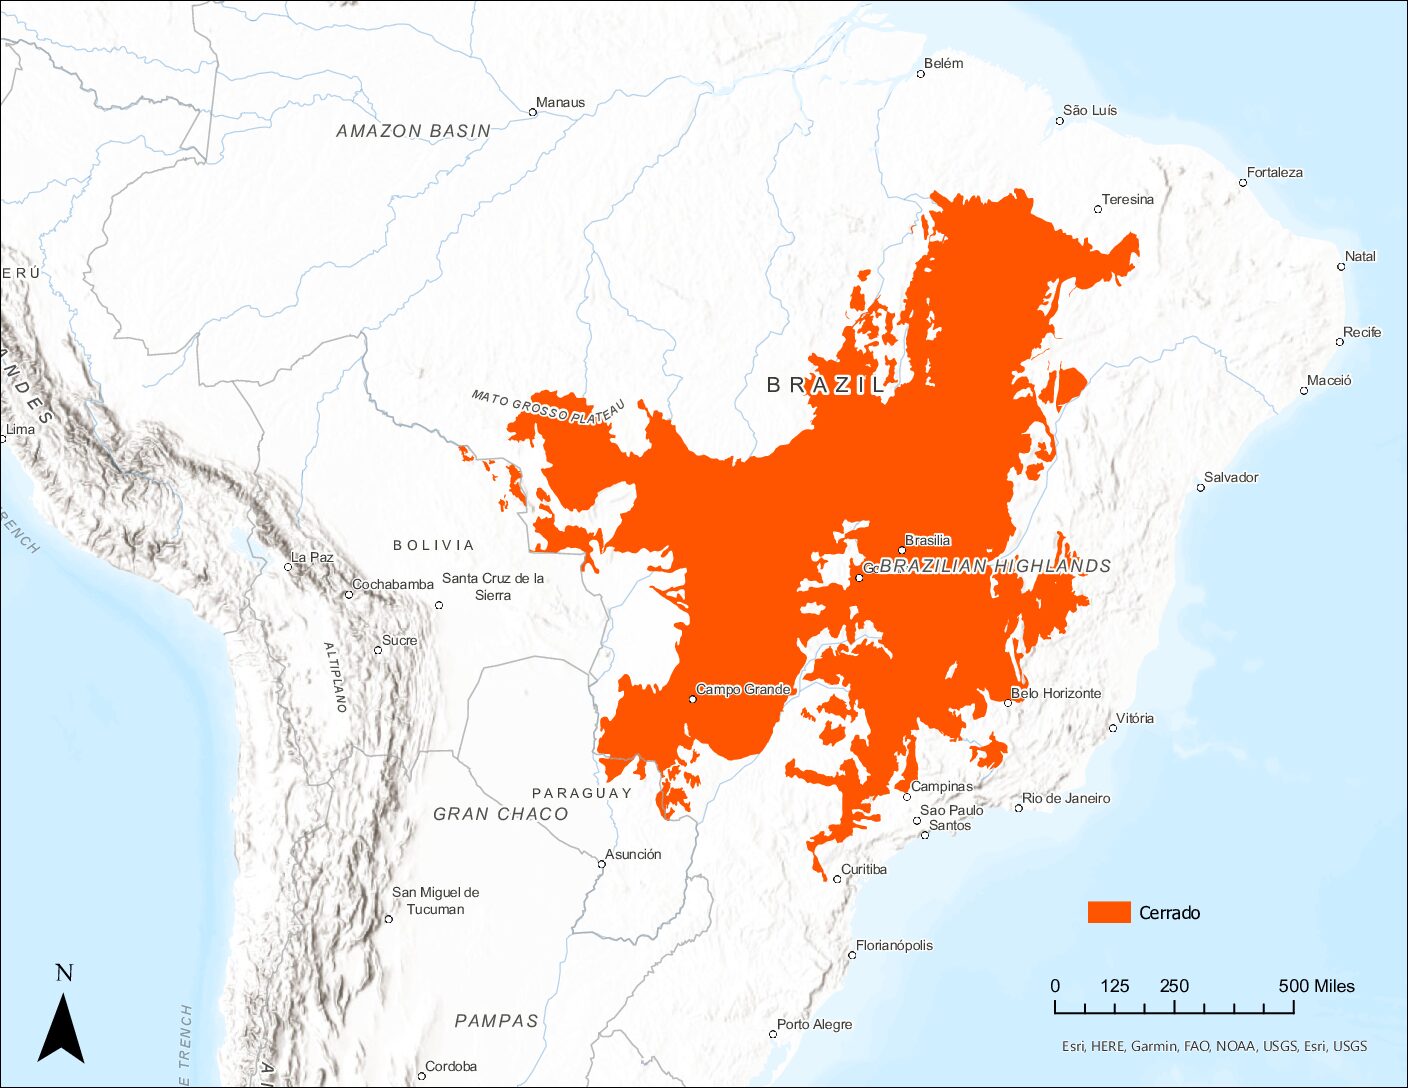 Map showing the northern part of South America centered on Brazil. The region of the cerrado is shaded dark orange. The region covers a large part of southern to northeastern Brazil.